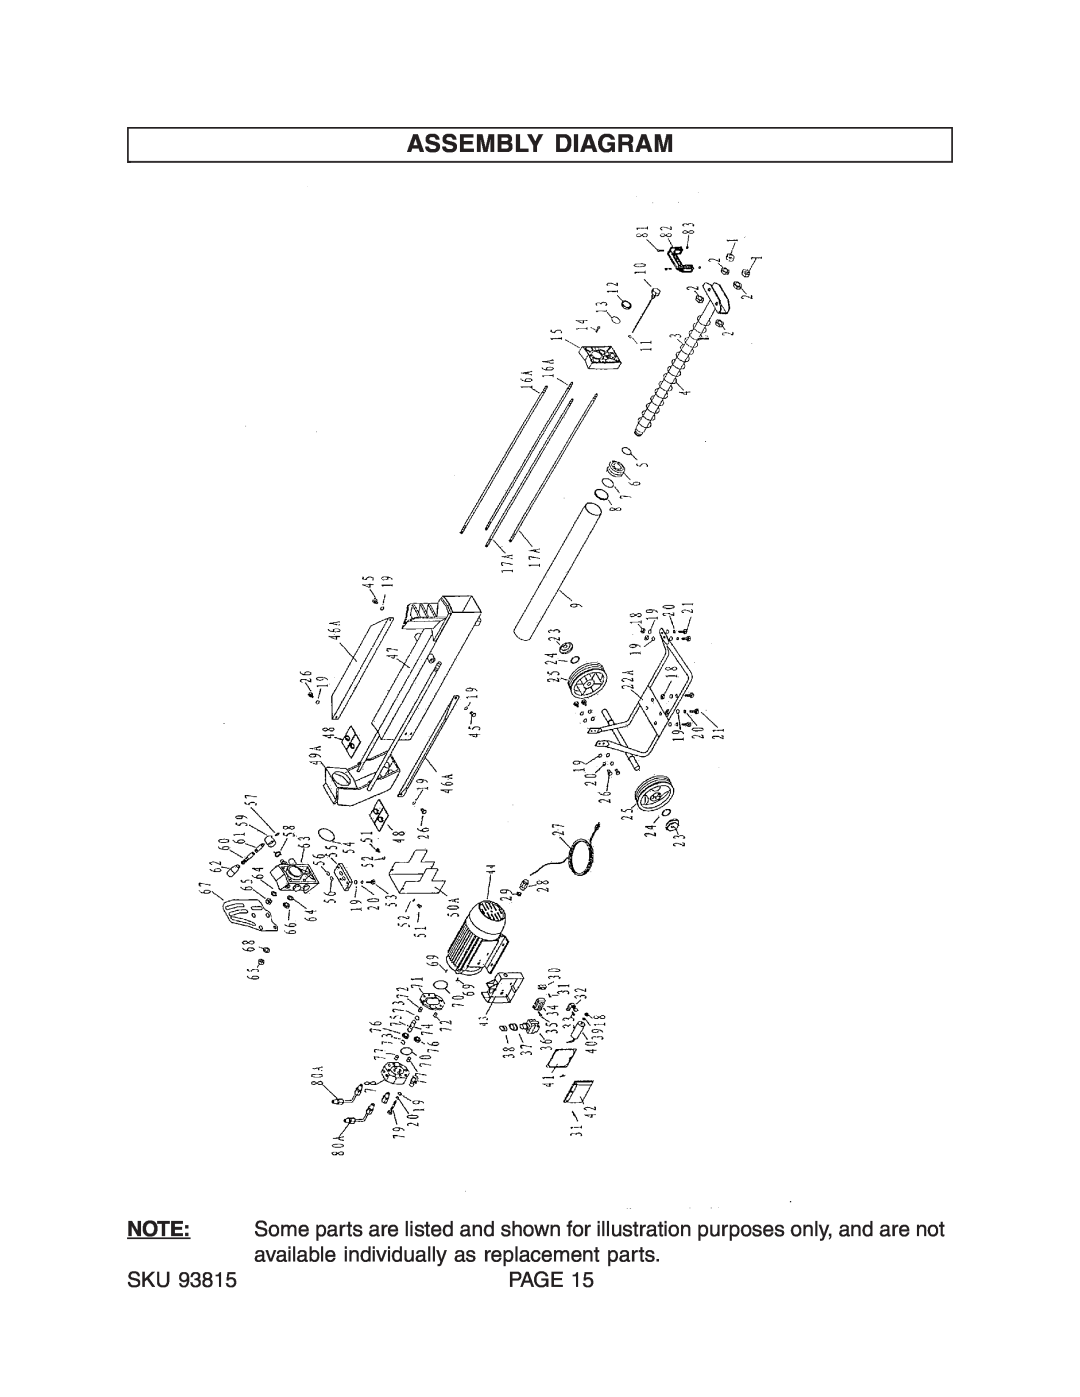 Harbor Freight Tools 93815 manual Assembly Diagram, available individually as replacement parts, Page 